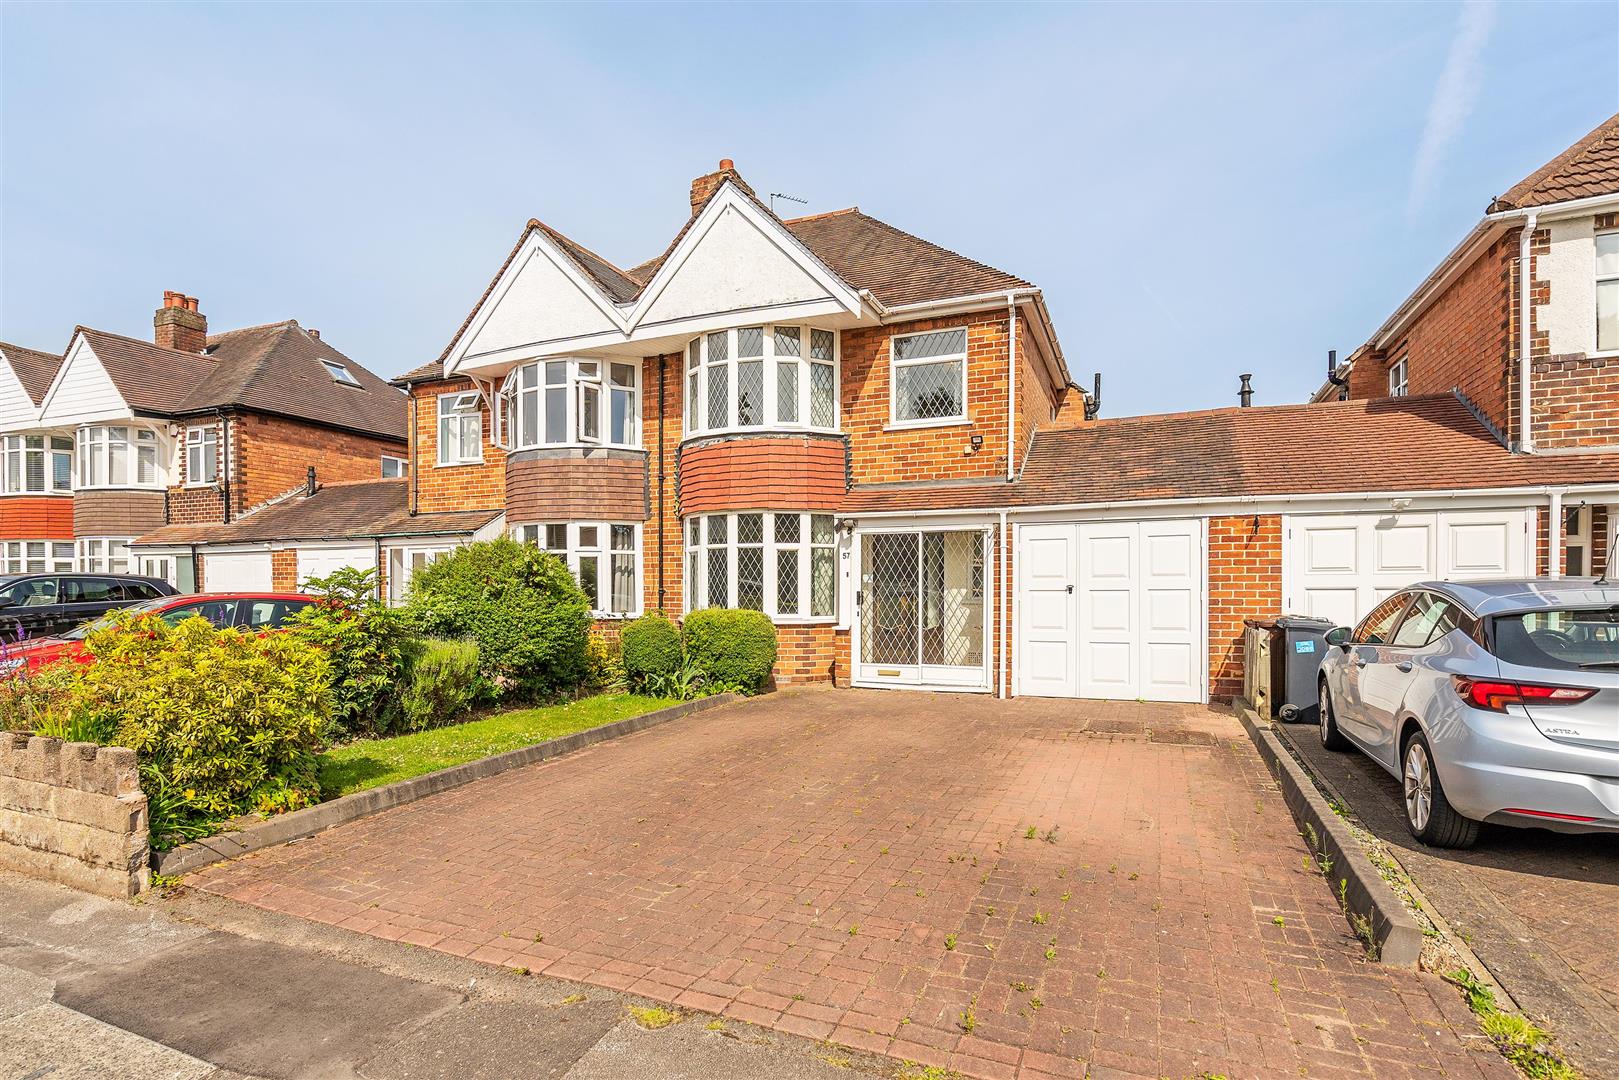 3 bed  for sale in Haslucks Croft, Solihull, B90 